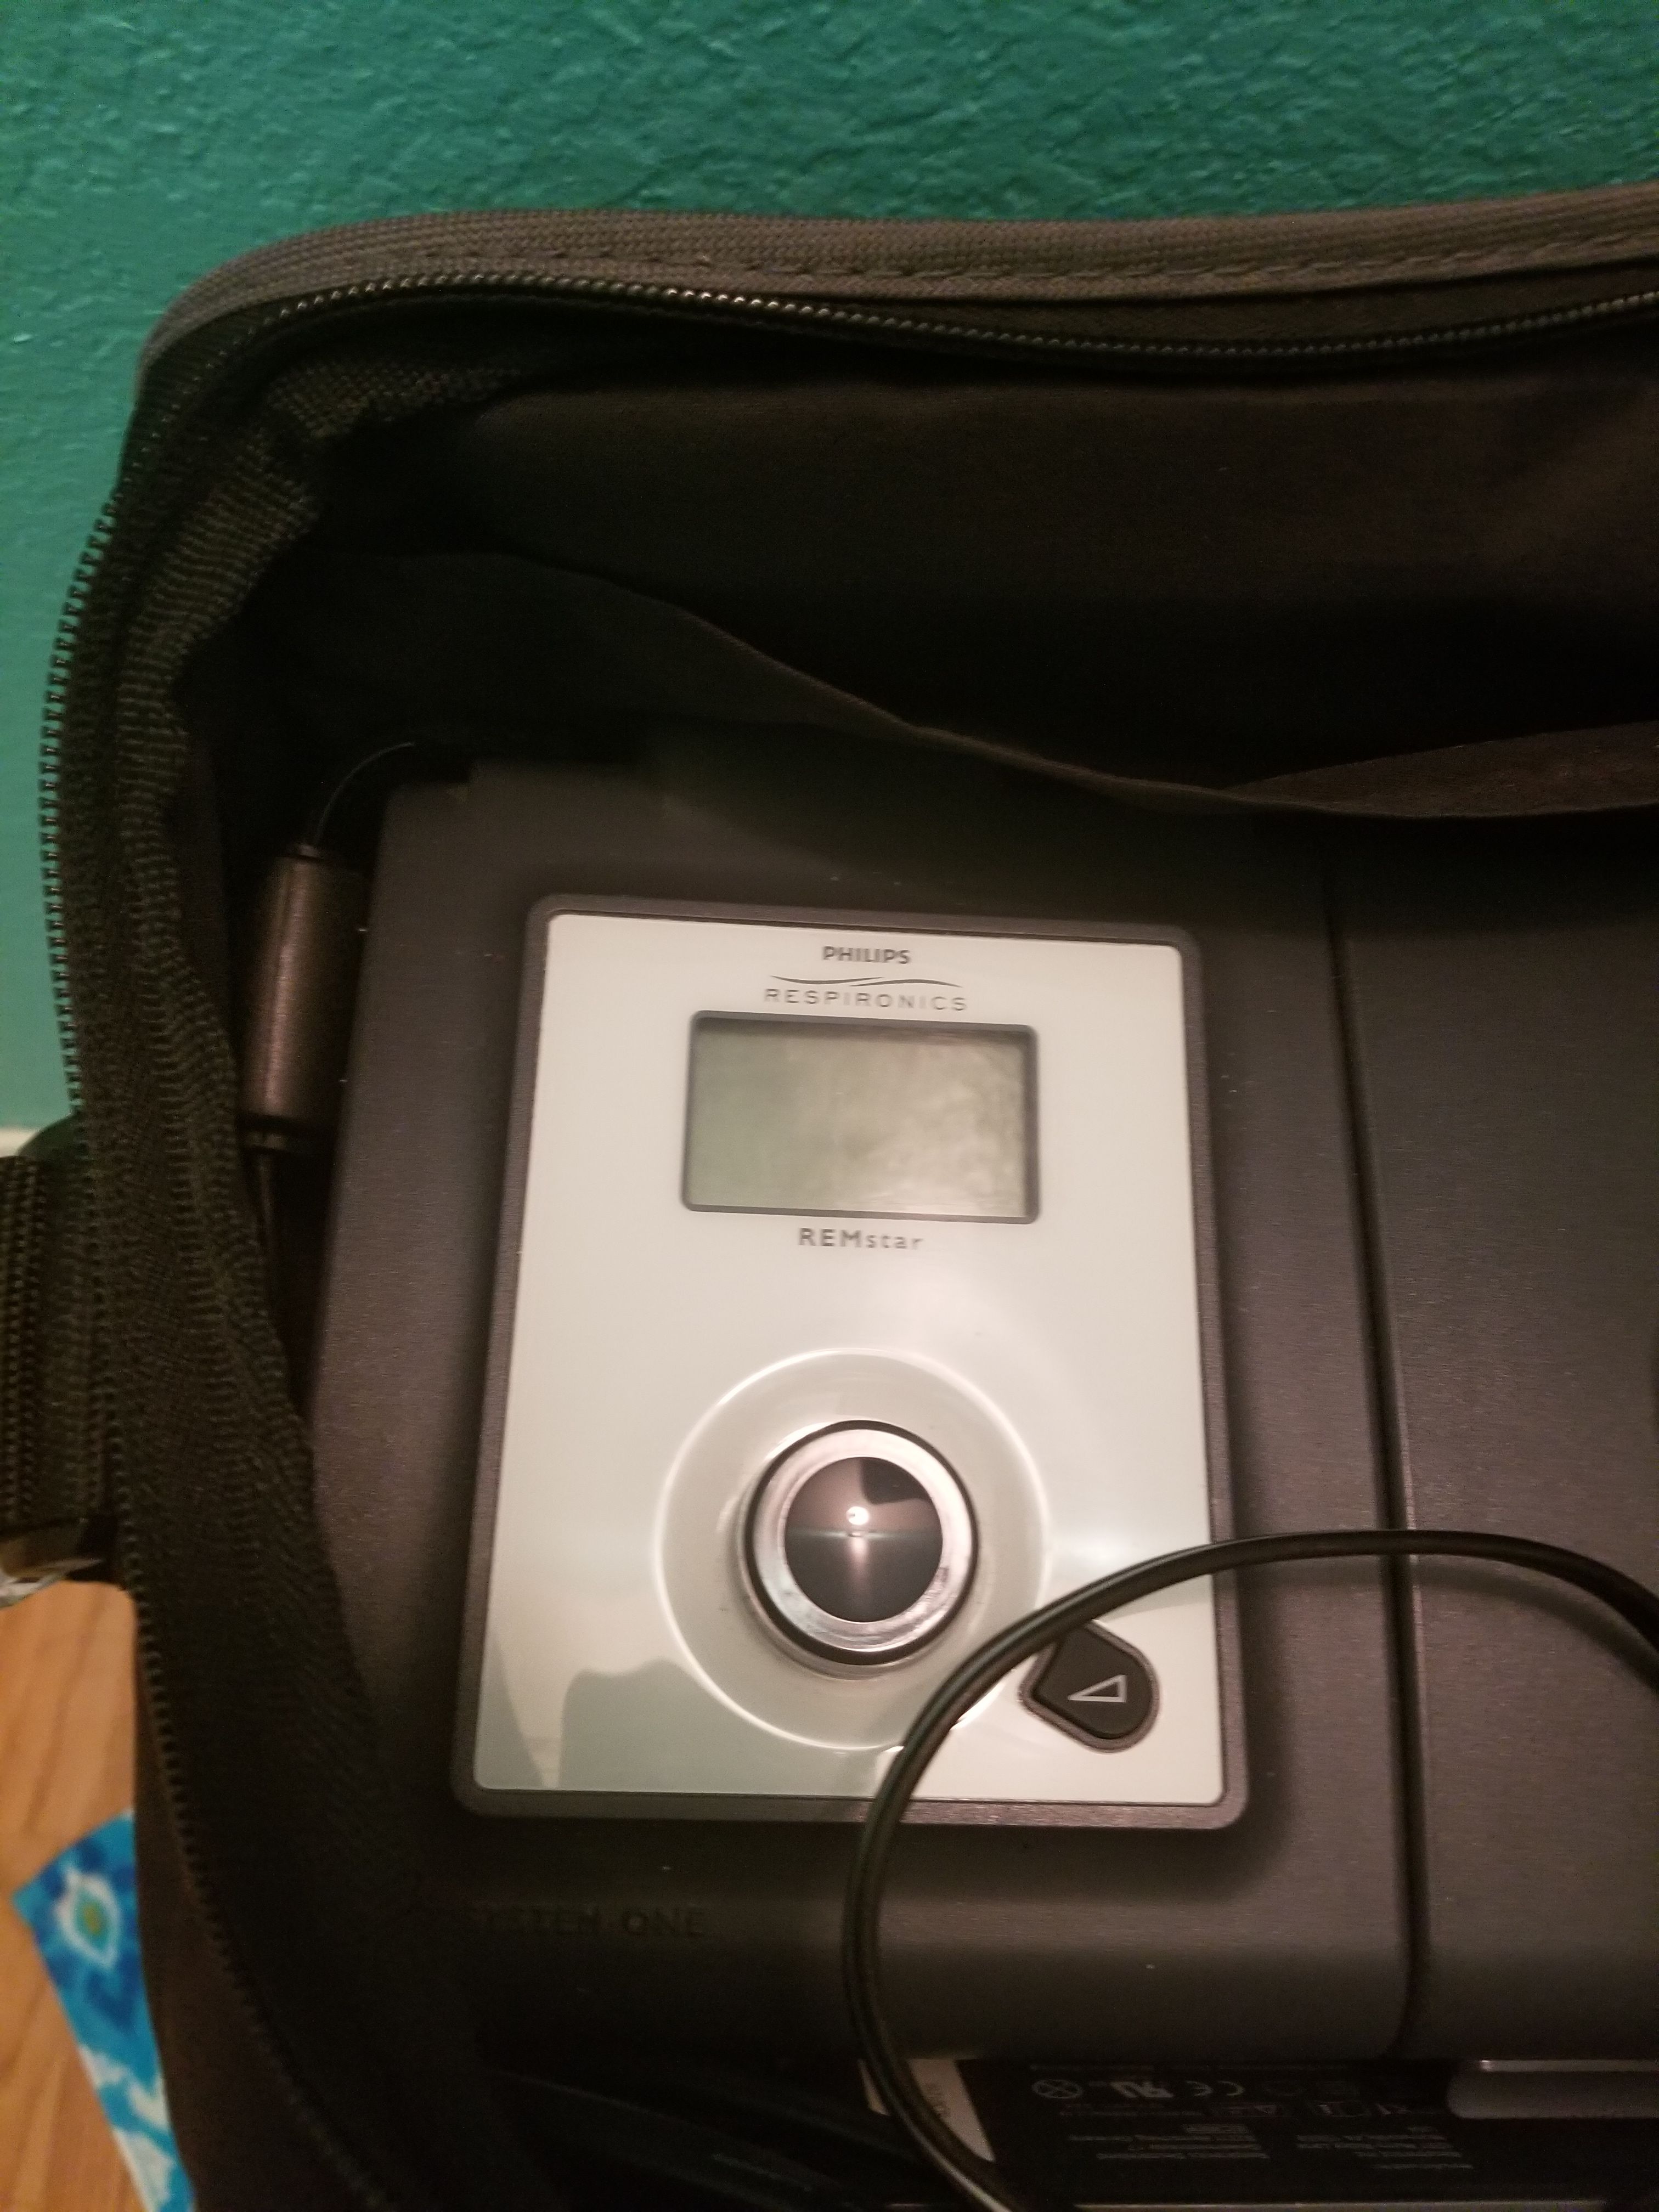 Phillips Resperonics Cpap oxygen breathing machine.. Comes complete with mask and carry case.. Works great.. Like new!